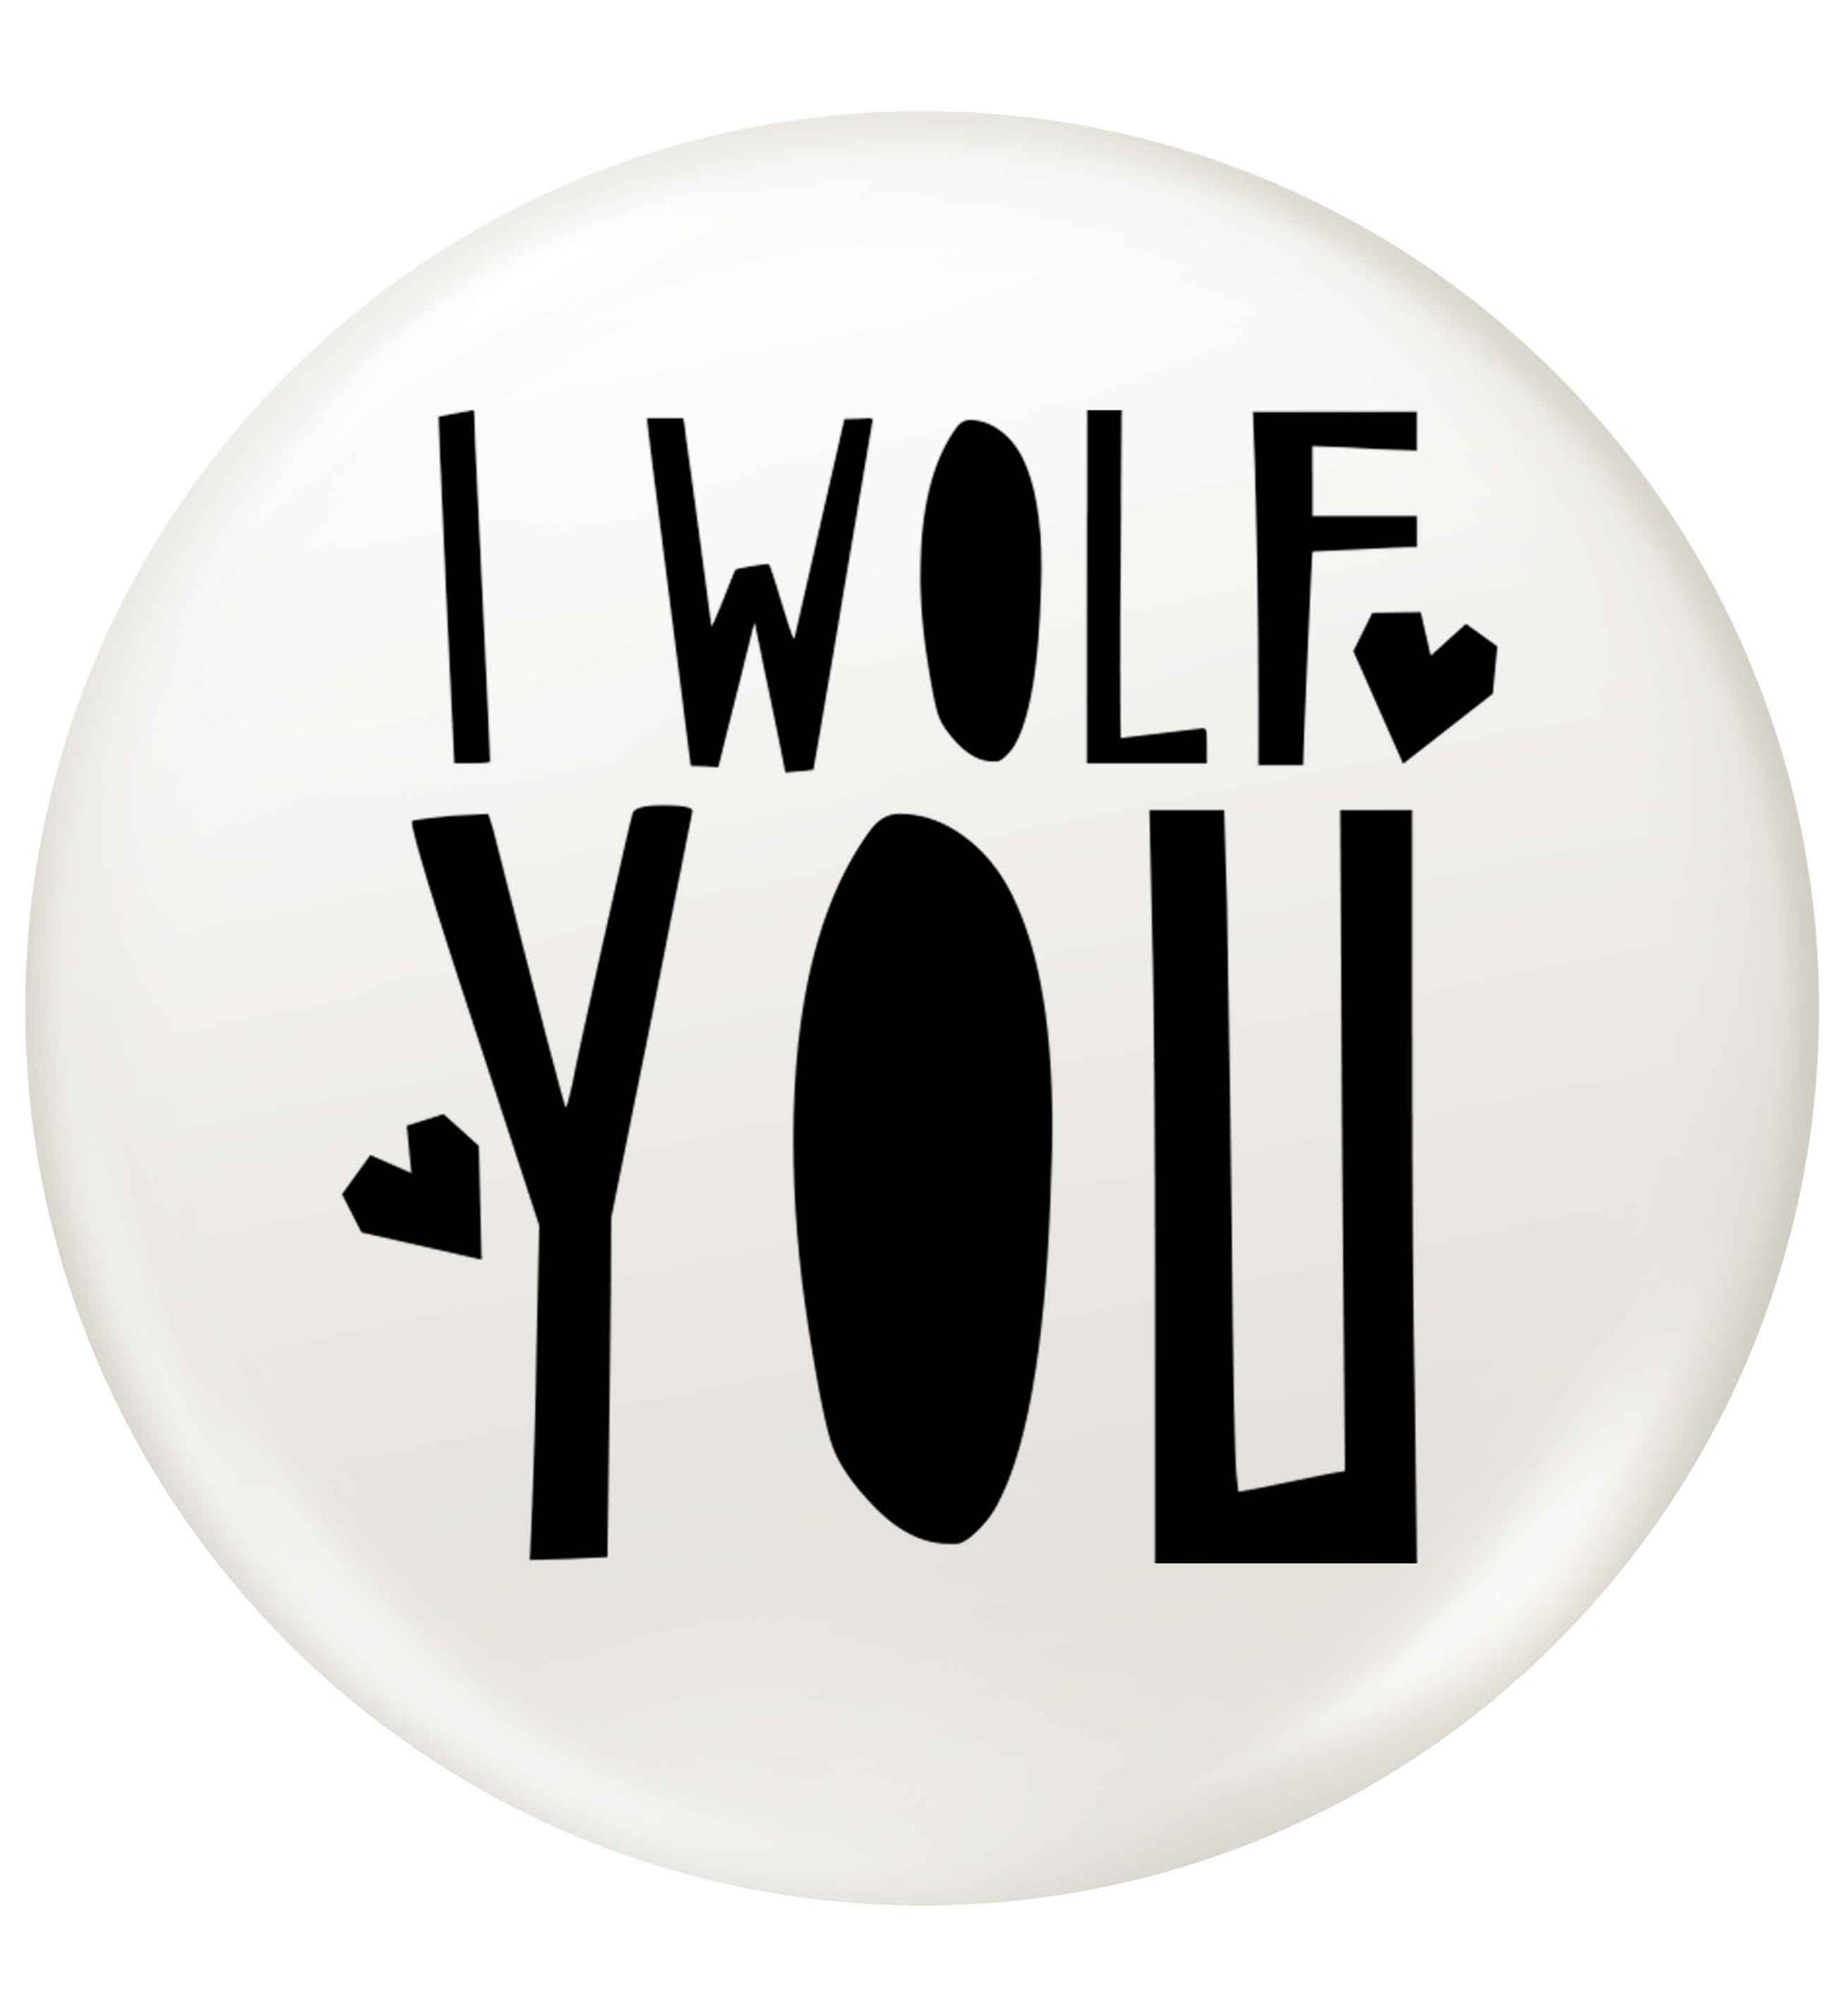 I wolf you small 25mm Pin badge